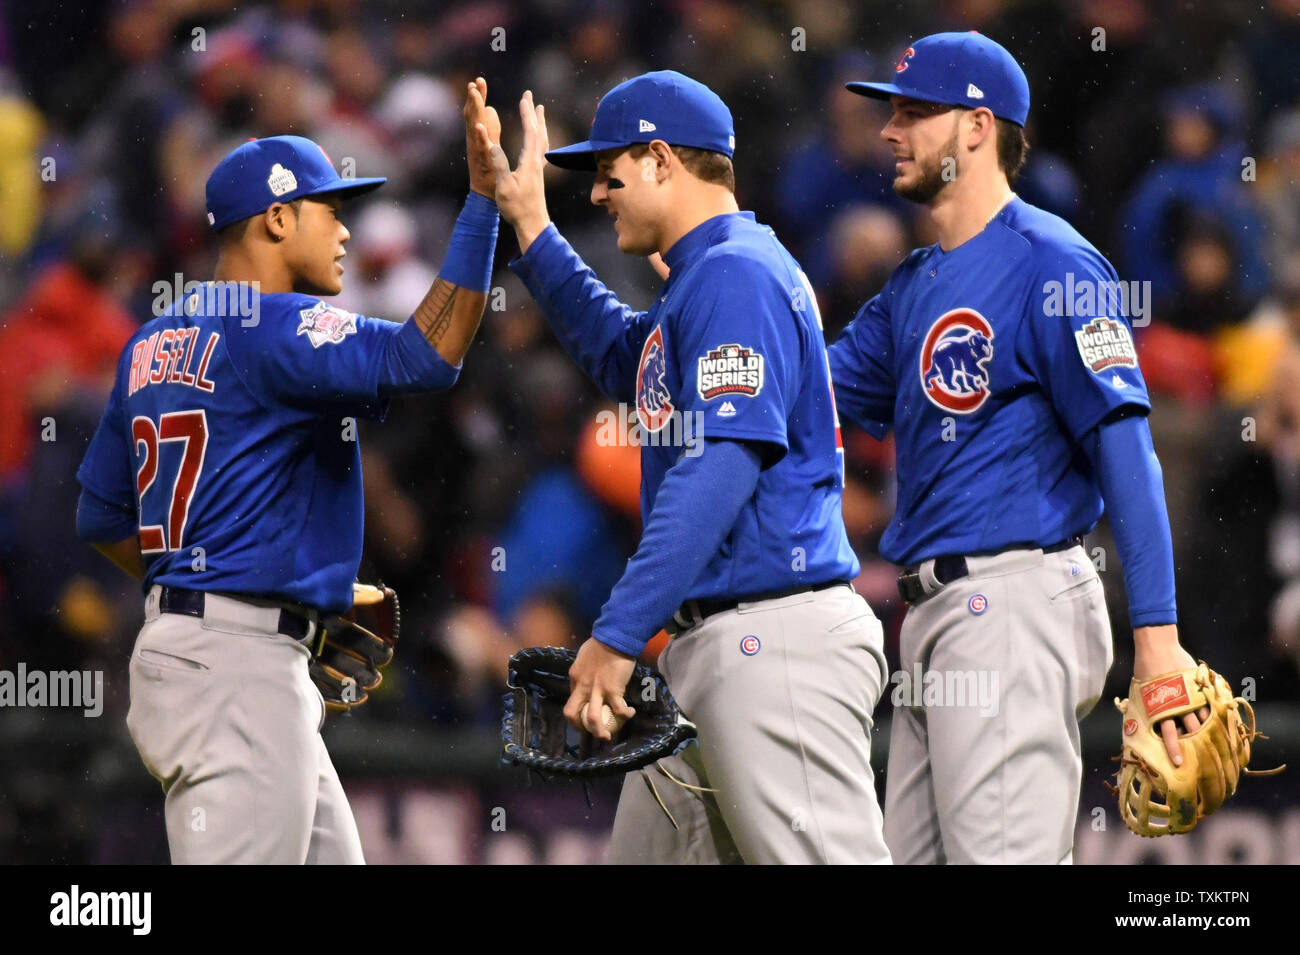 Chicago Cubs' Addison Russell (L) Anthony Rizzo and Kris Bryant (R)  celebrate a 5-1 win over the Cleveland Indians after game 2 of the World  Series at Progressive Field in Cleveland, Ohio